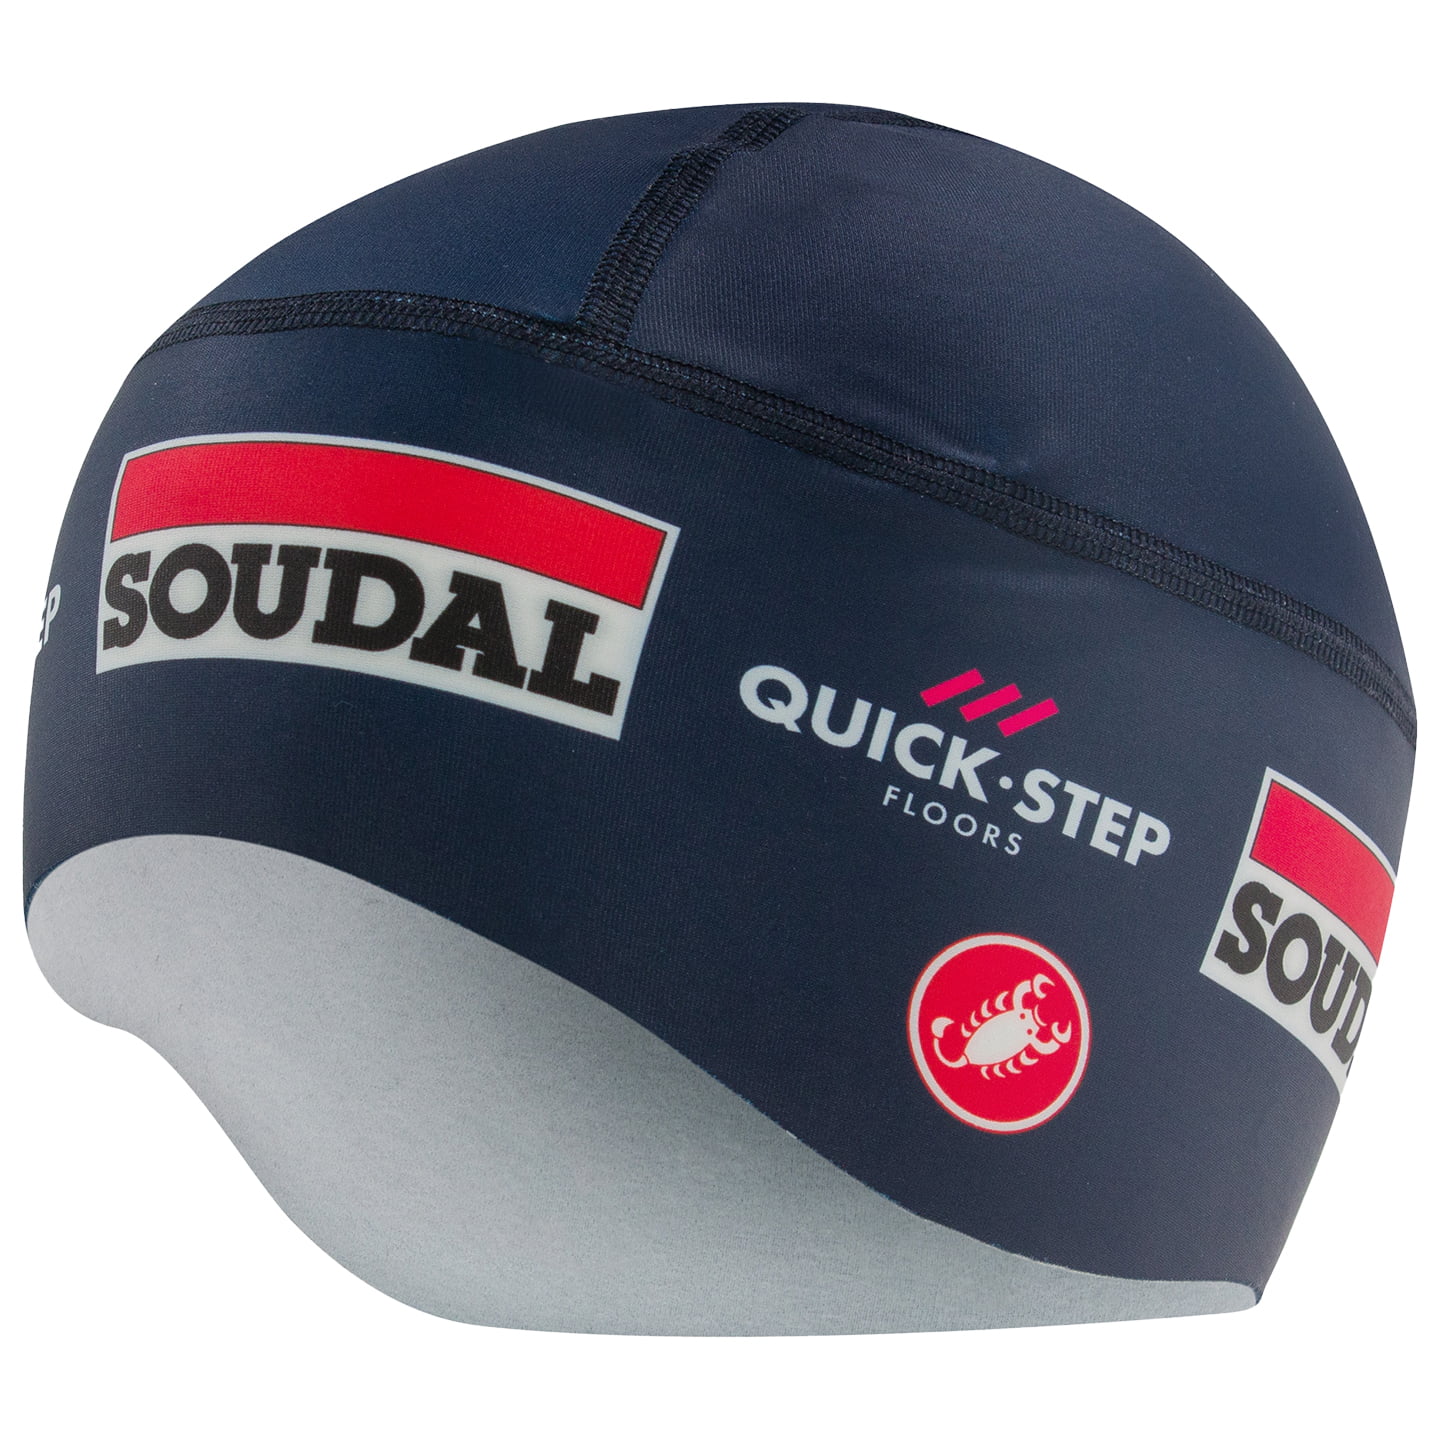 SOUDAL QUICK-STEP 2024 Helmet Liner, for men, Cycling clothing